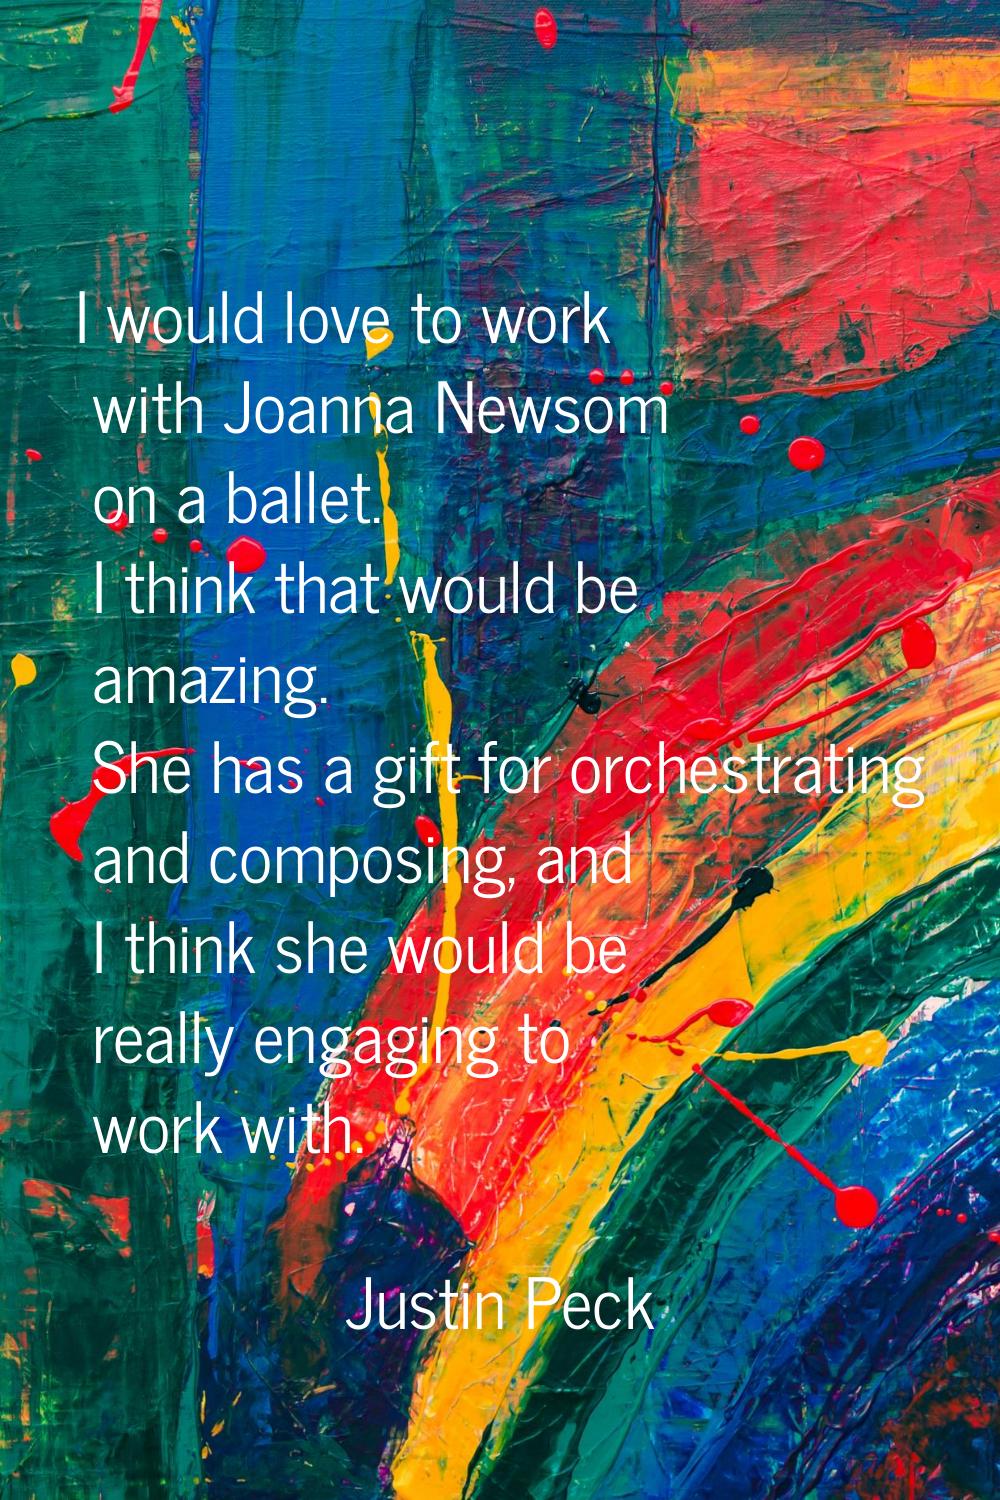 I would love to work with Joanna Newsom on a ballet. I think that would be amazing. She has a gift 